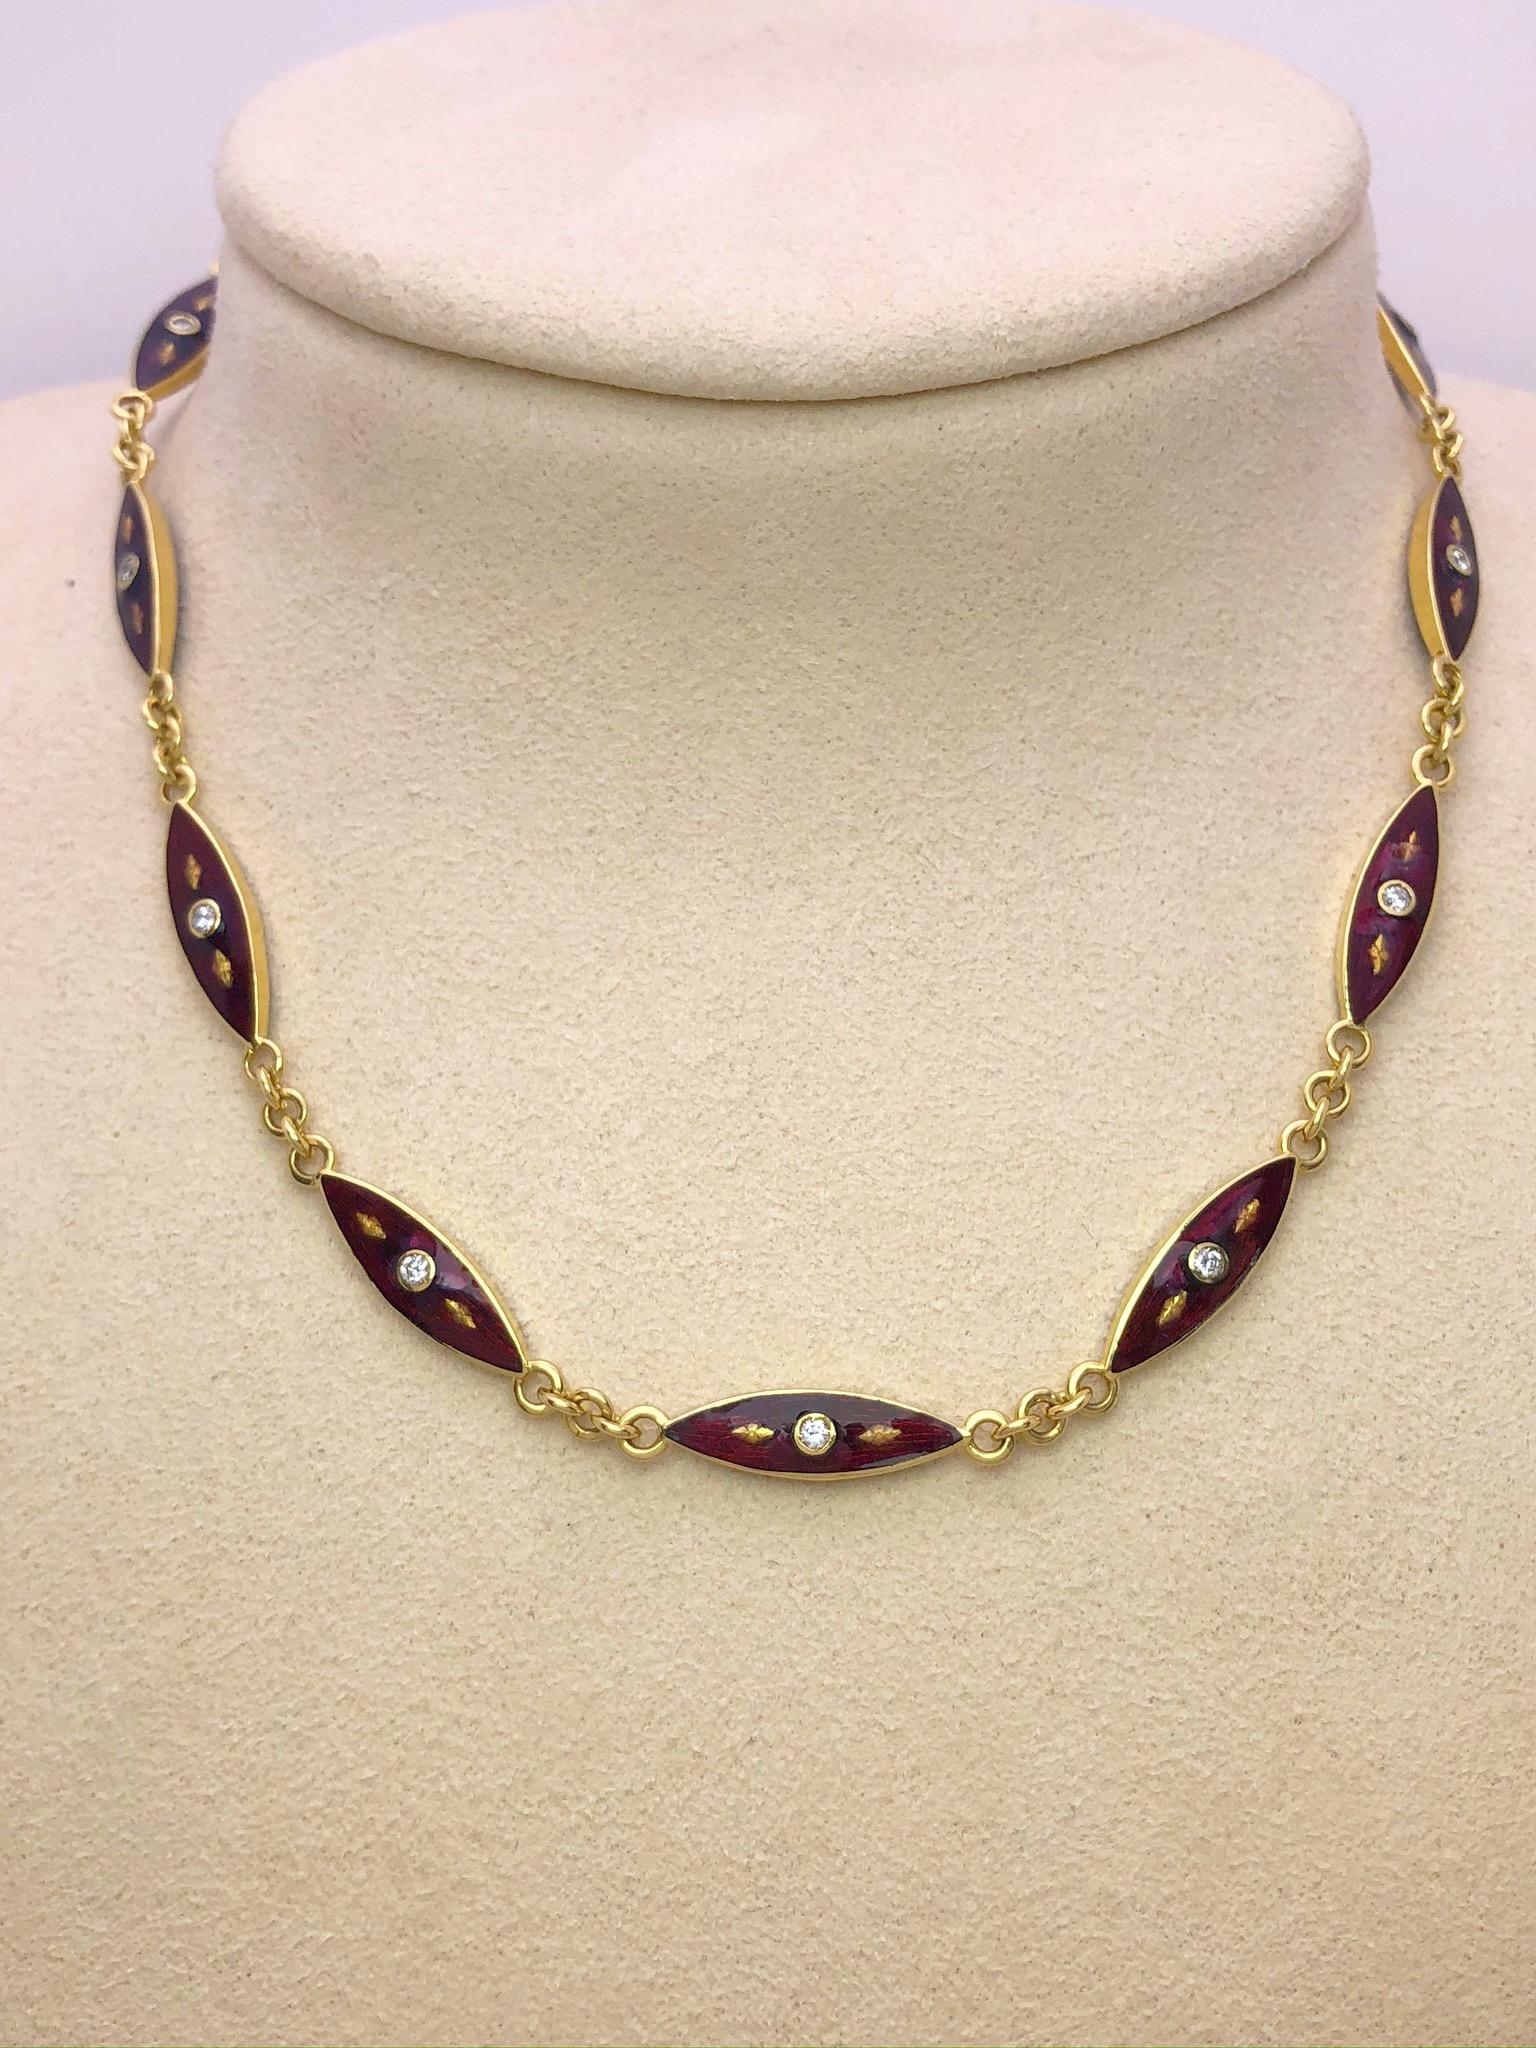 This vintage necklace is designed with 12 marquis shaped sections of 18 karat yellow gold with red enamel and diamond centers. Each piece has enamel and diamonds on both sides, this way when the sections move you are always seeing the beautiful